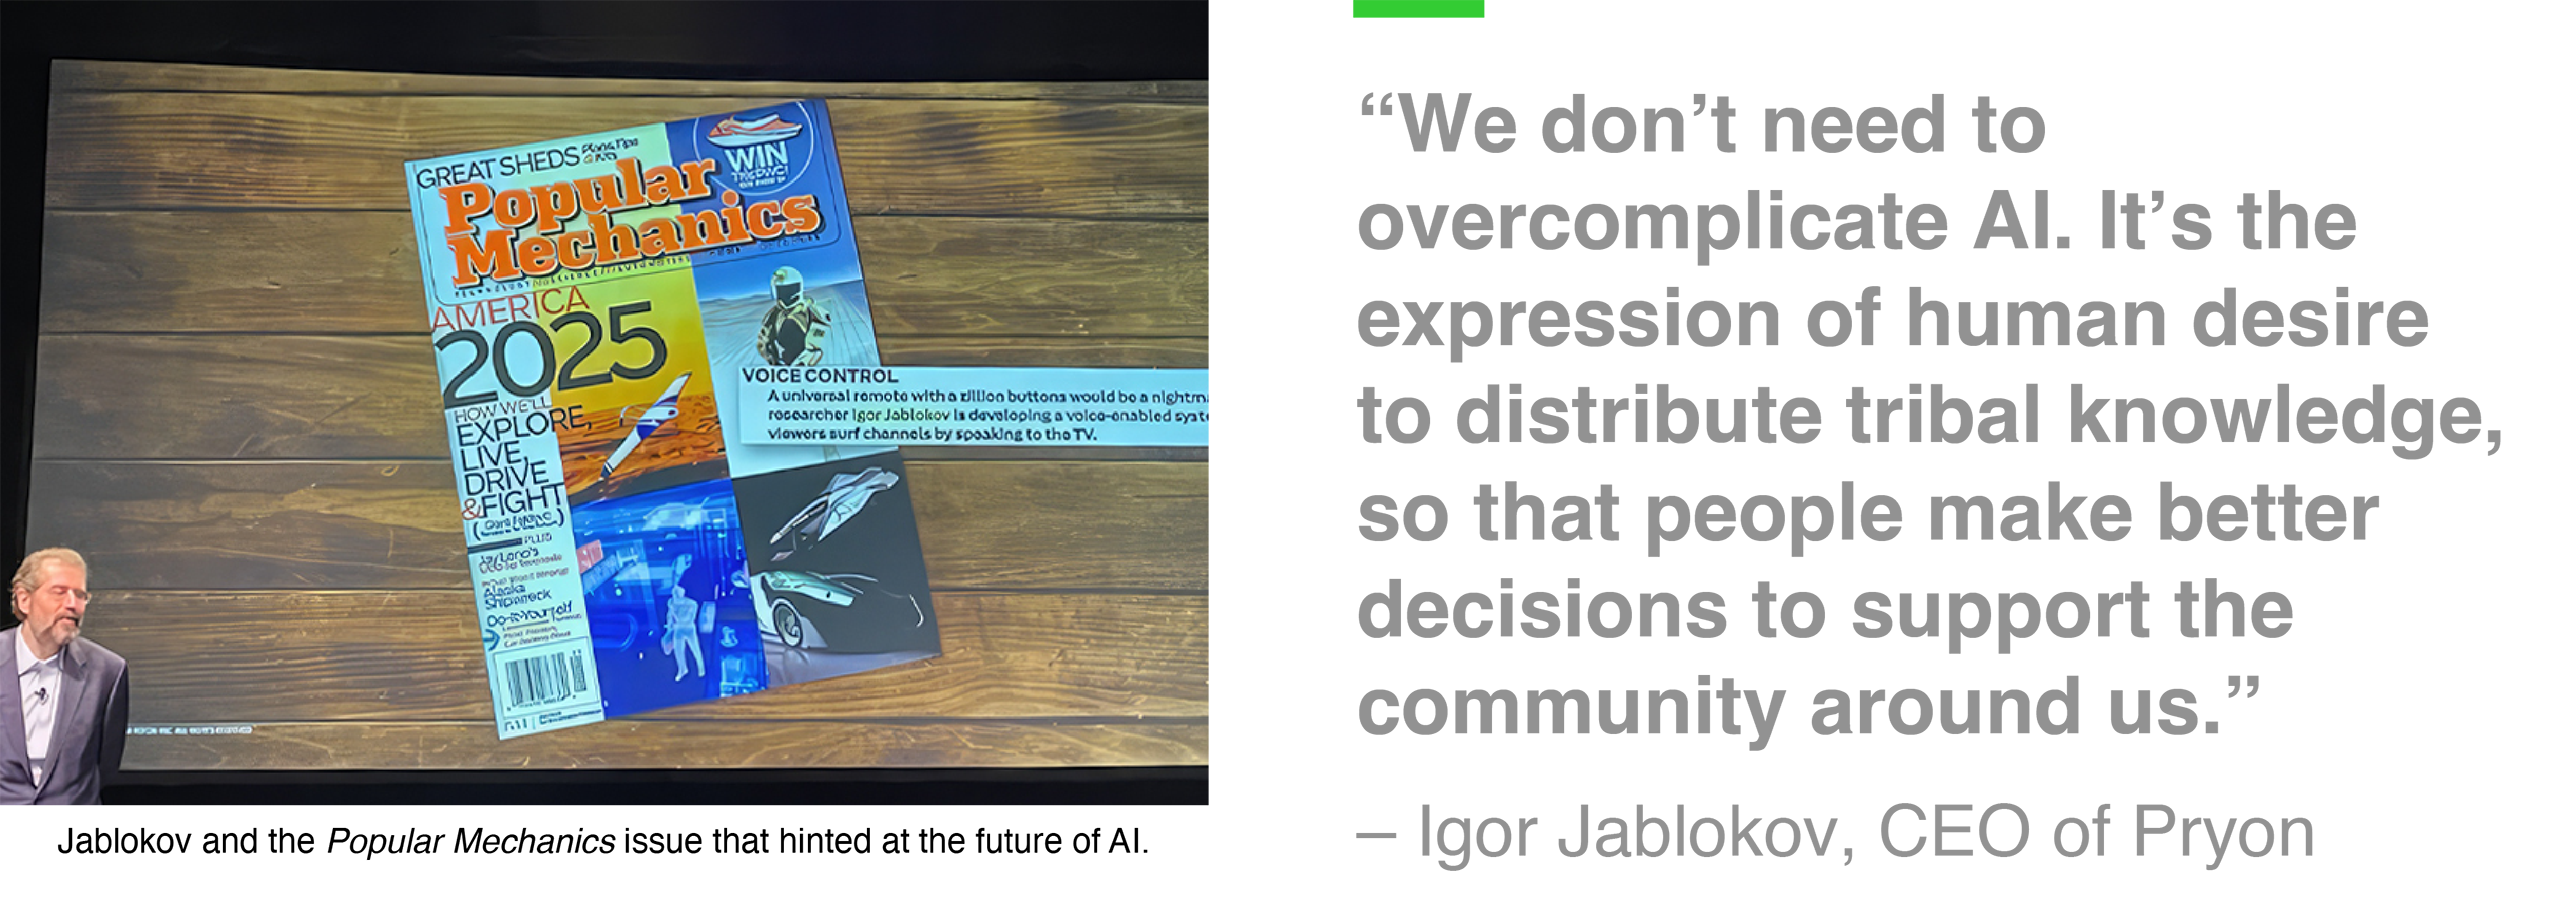 Left: Jablokov and the Popular Mechanics issue that hinted at the future of AI. Right: “We don’t need to overcomplicate AI. It’s the expression of human desire to distribute tribal knowledge, so that people make better decisions to support the community around us.” – Igor Jablokov, CEO of Pryon